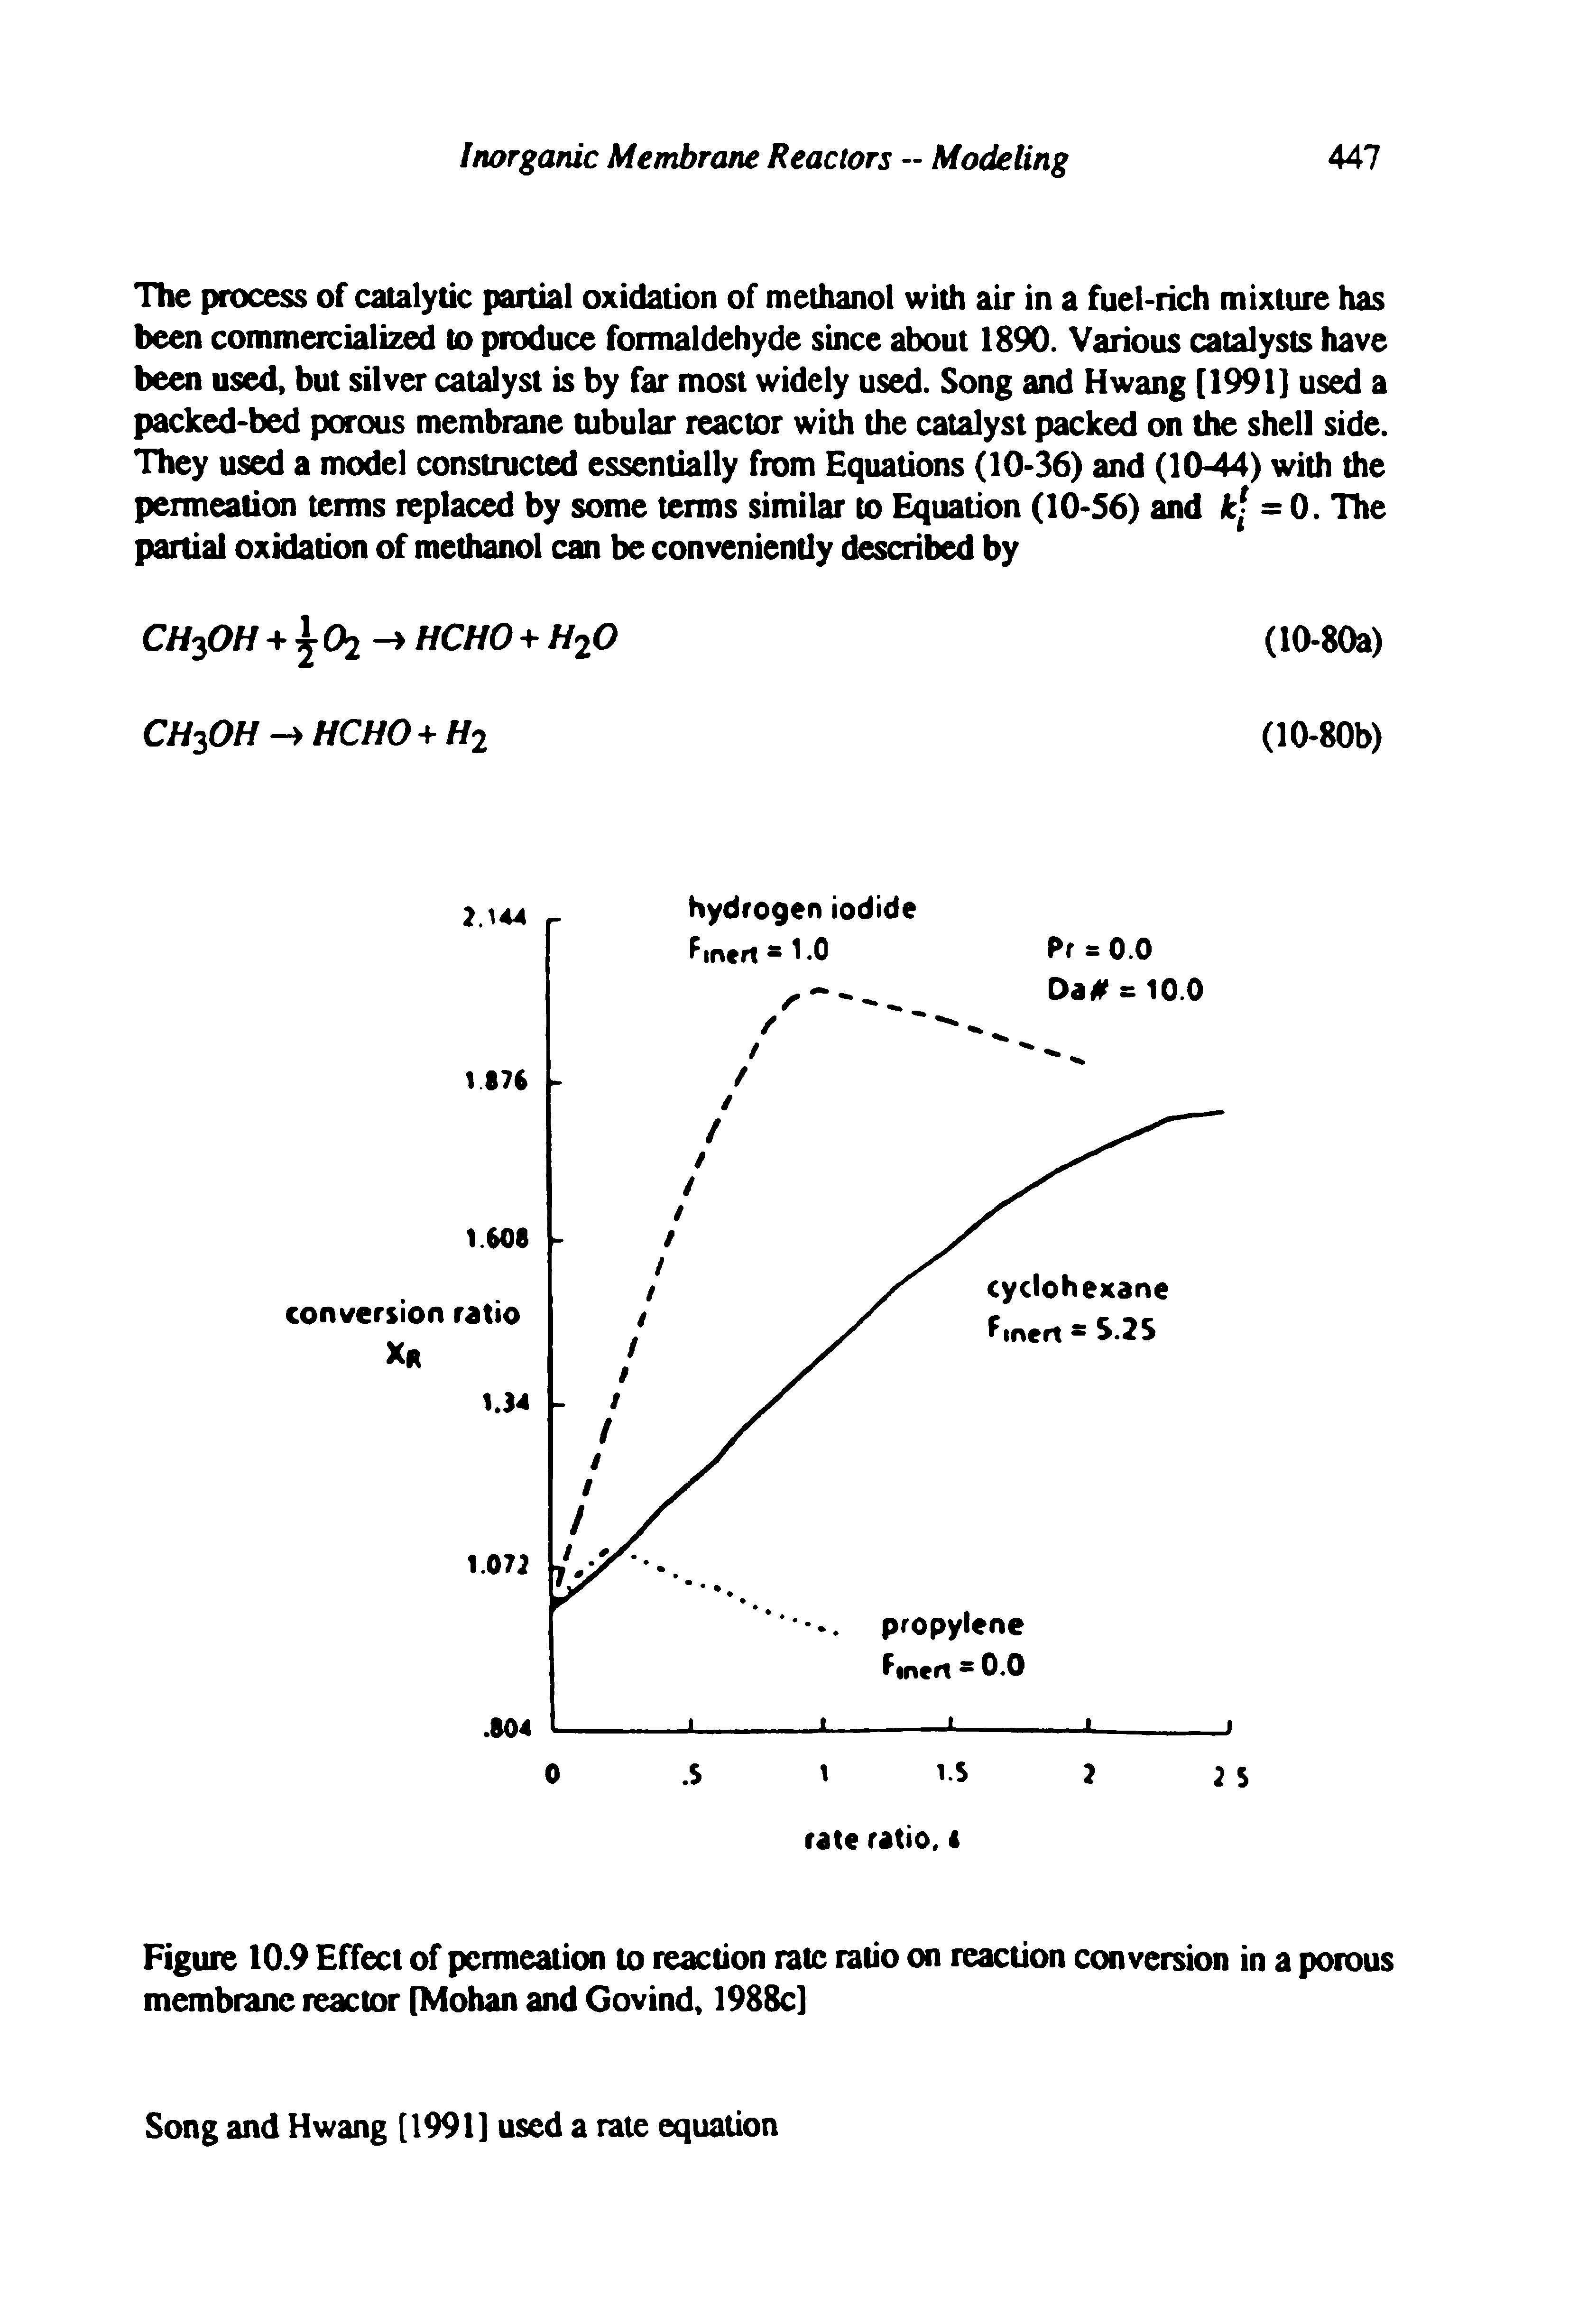 Figure 10.9 Effect of permeation to reaction rate ratio on reaction conversion in a porous membrane reactor [Mohan and Govind 1988c]...